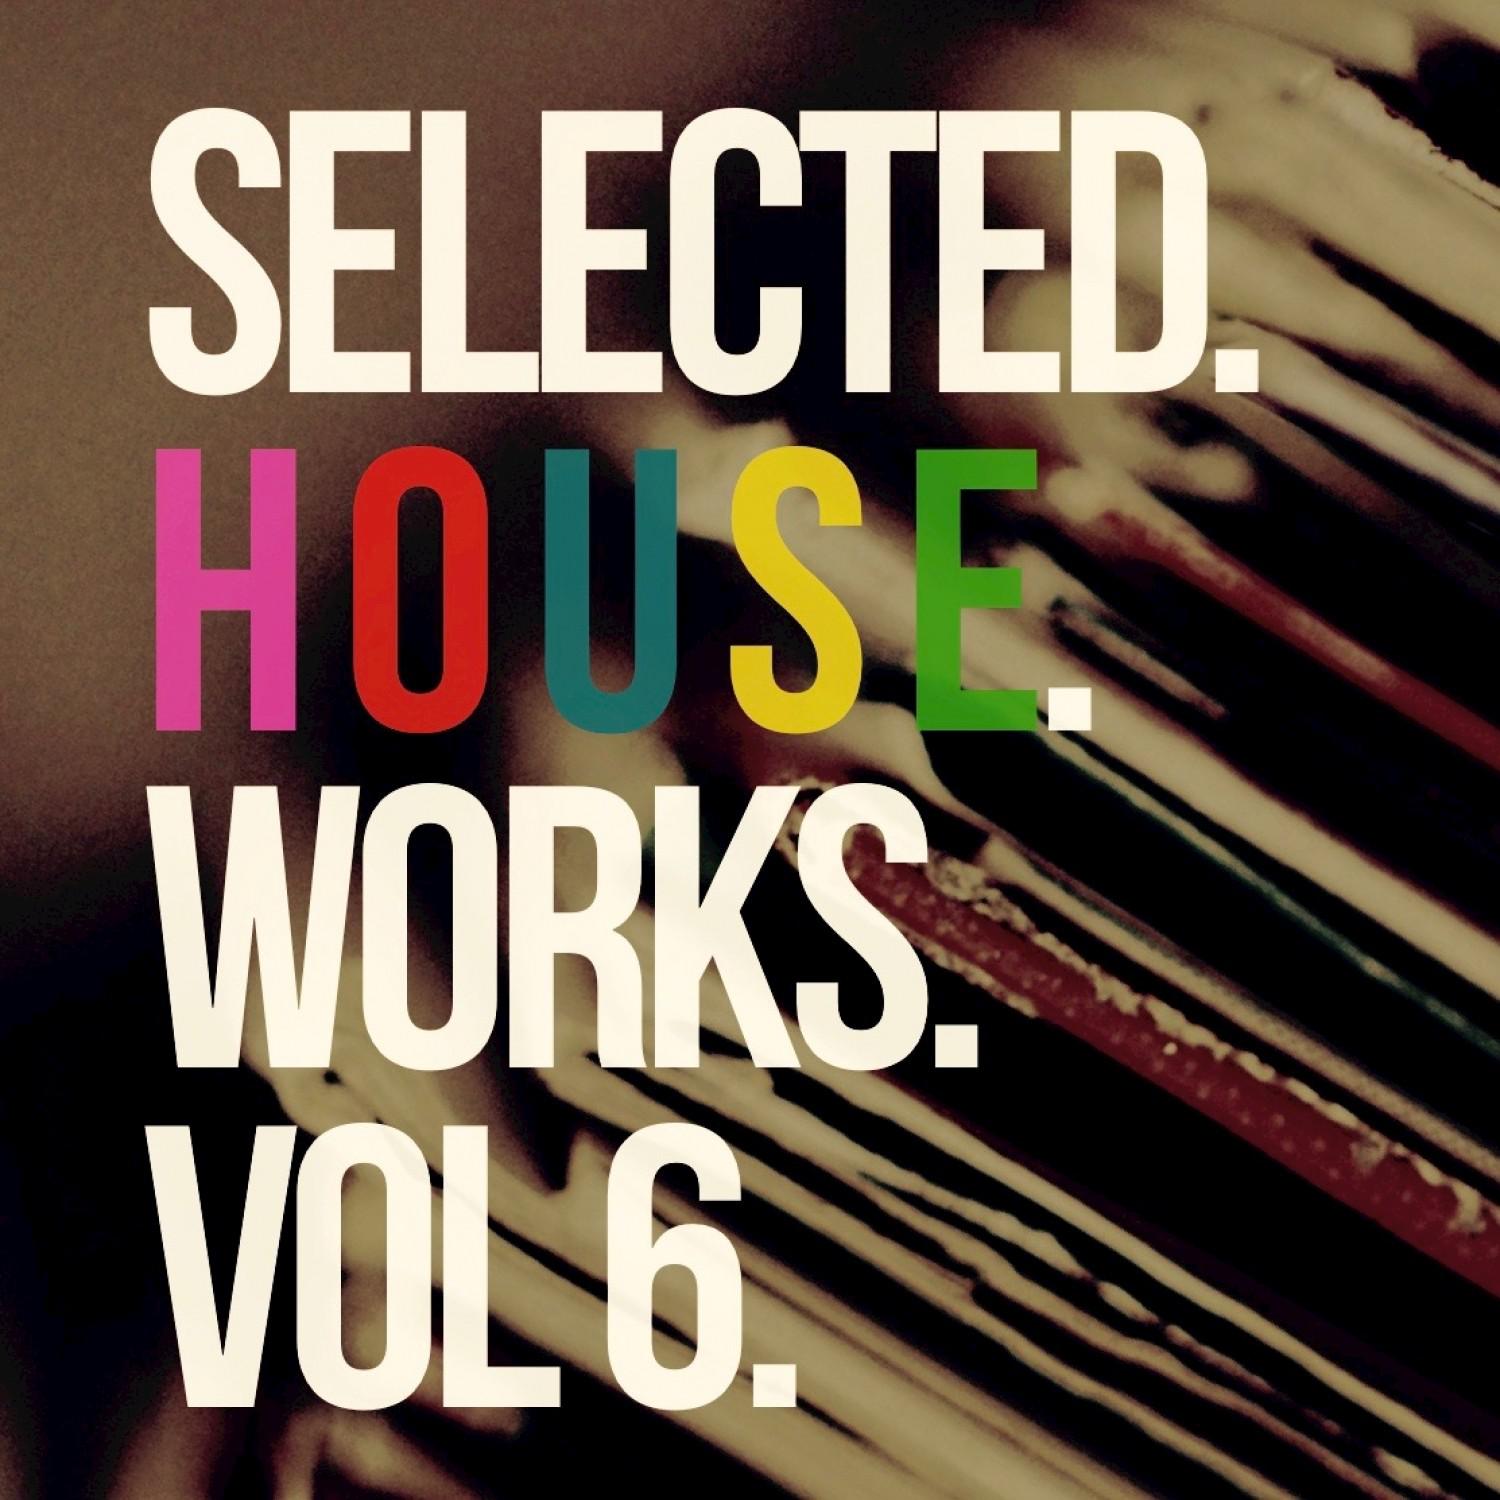 Selected House Works, Vol. 6